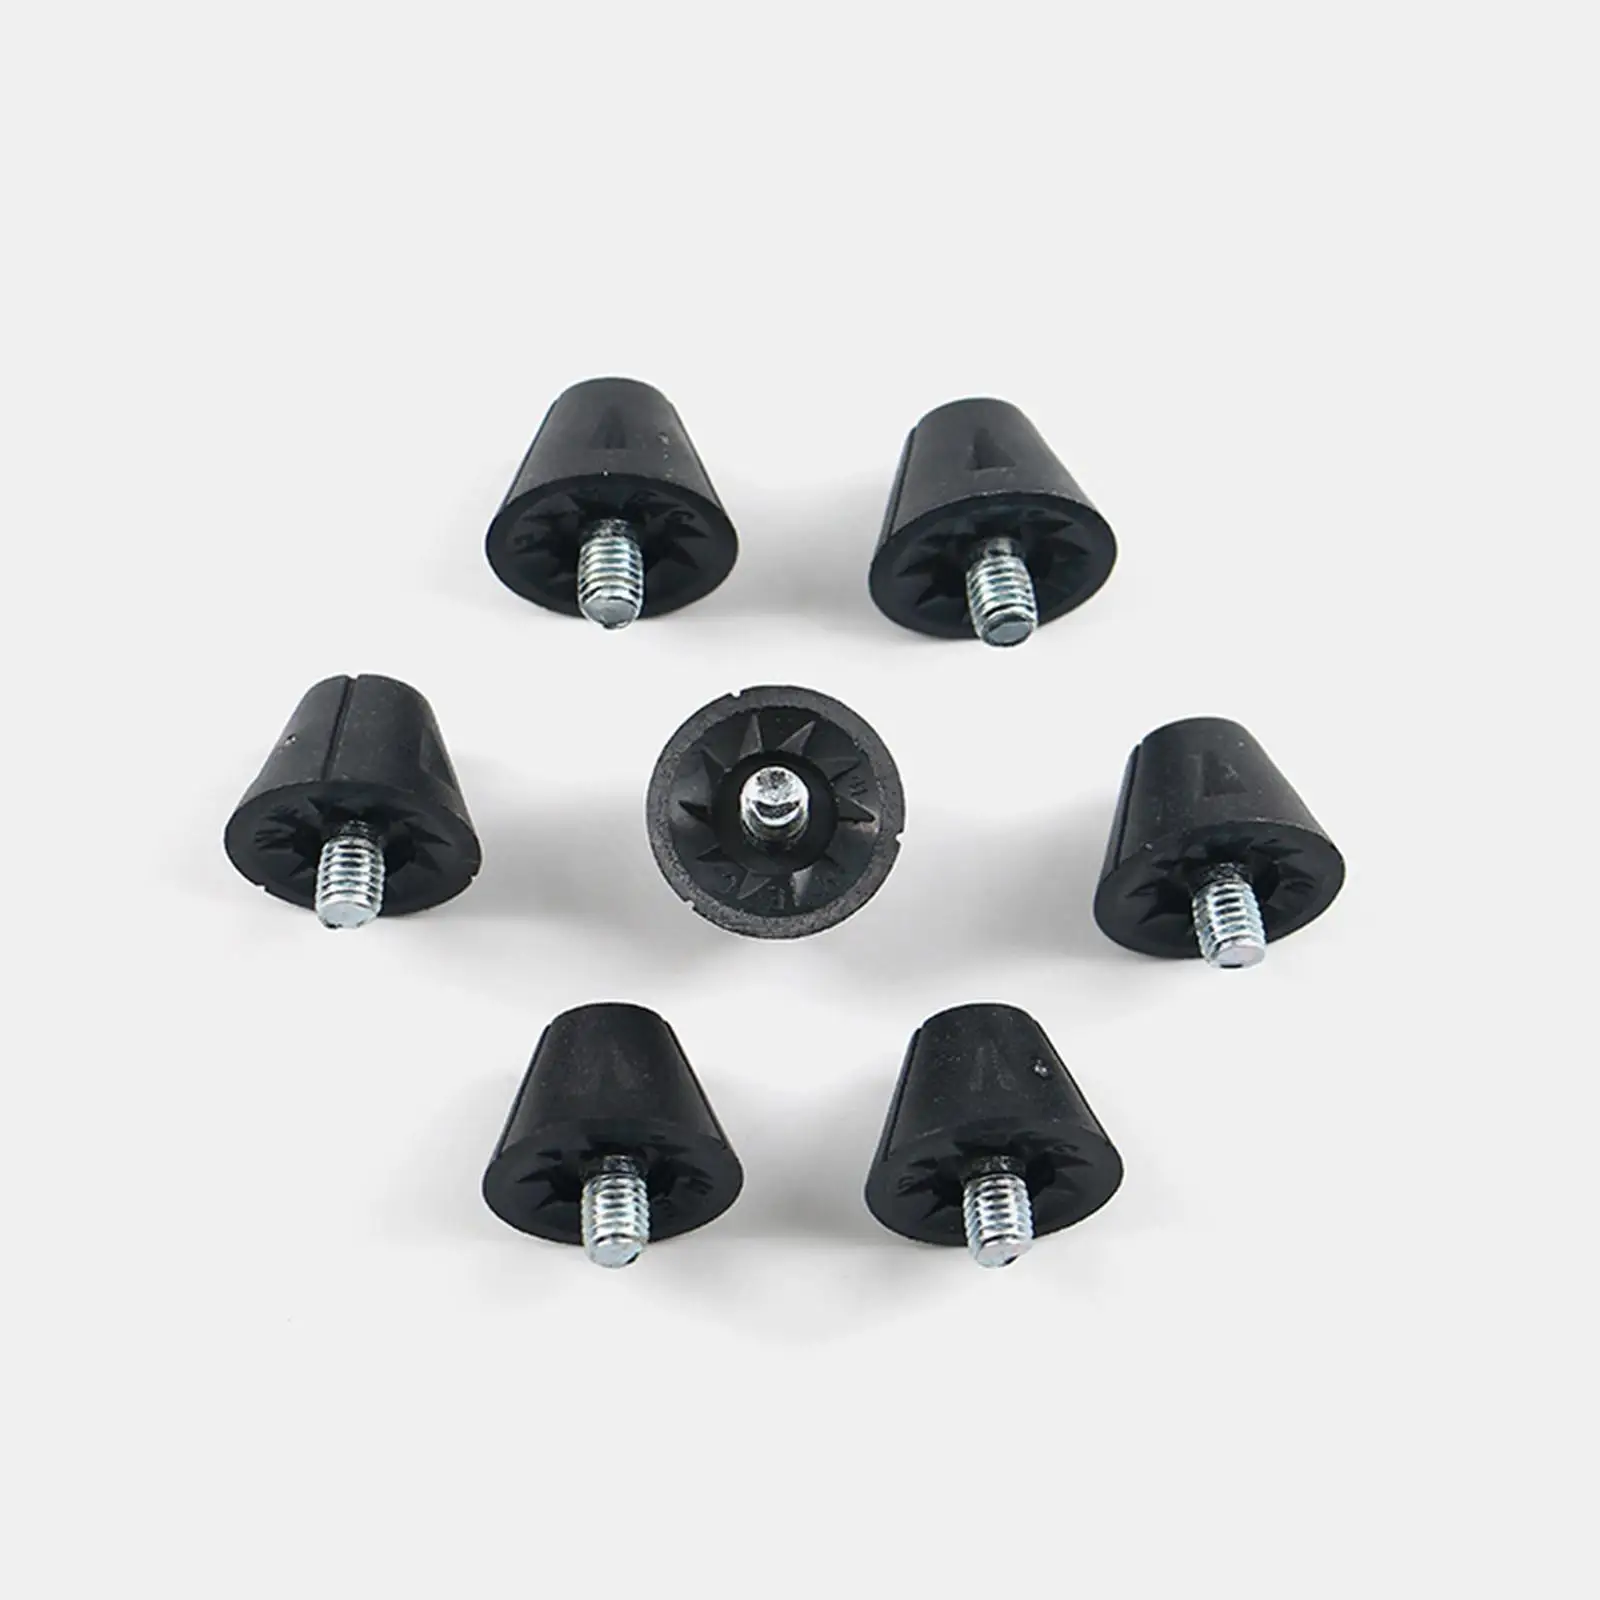 12Pcs Football Boot Studs 13mm 16mm Universal Soccer Shoe Spikes Track Shoes Spikes for Athletic Sneakers Indoor Outdoor Sports